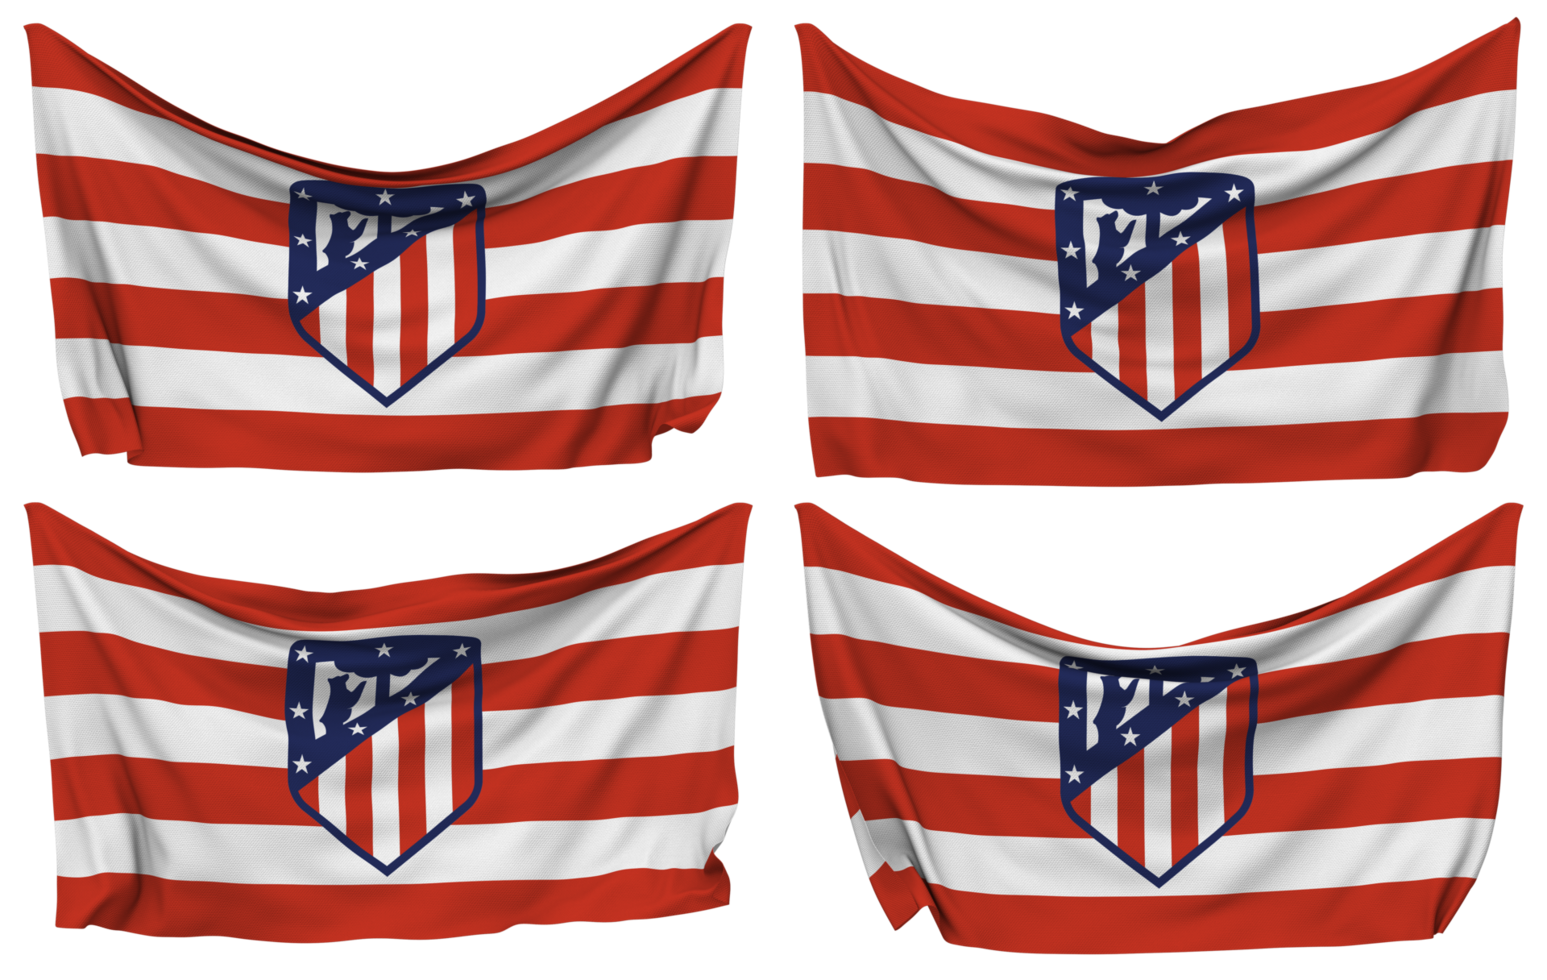 https://static.vecteezy.com/system/resources/previews/024/798/402/non_2x/club-atletico-de-madrid-football-club-pinned-flag-from-corners-isolated-with-different-waving-variations-3d-rendering-free-png.png